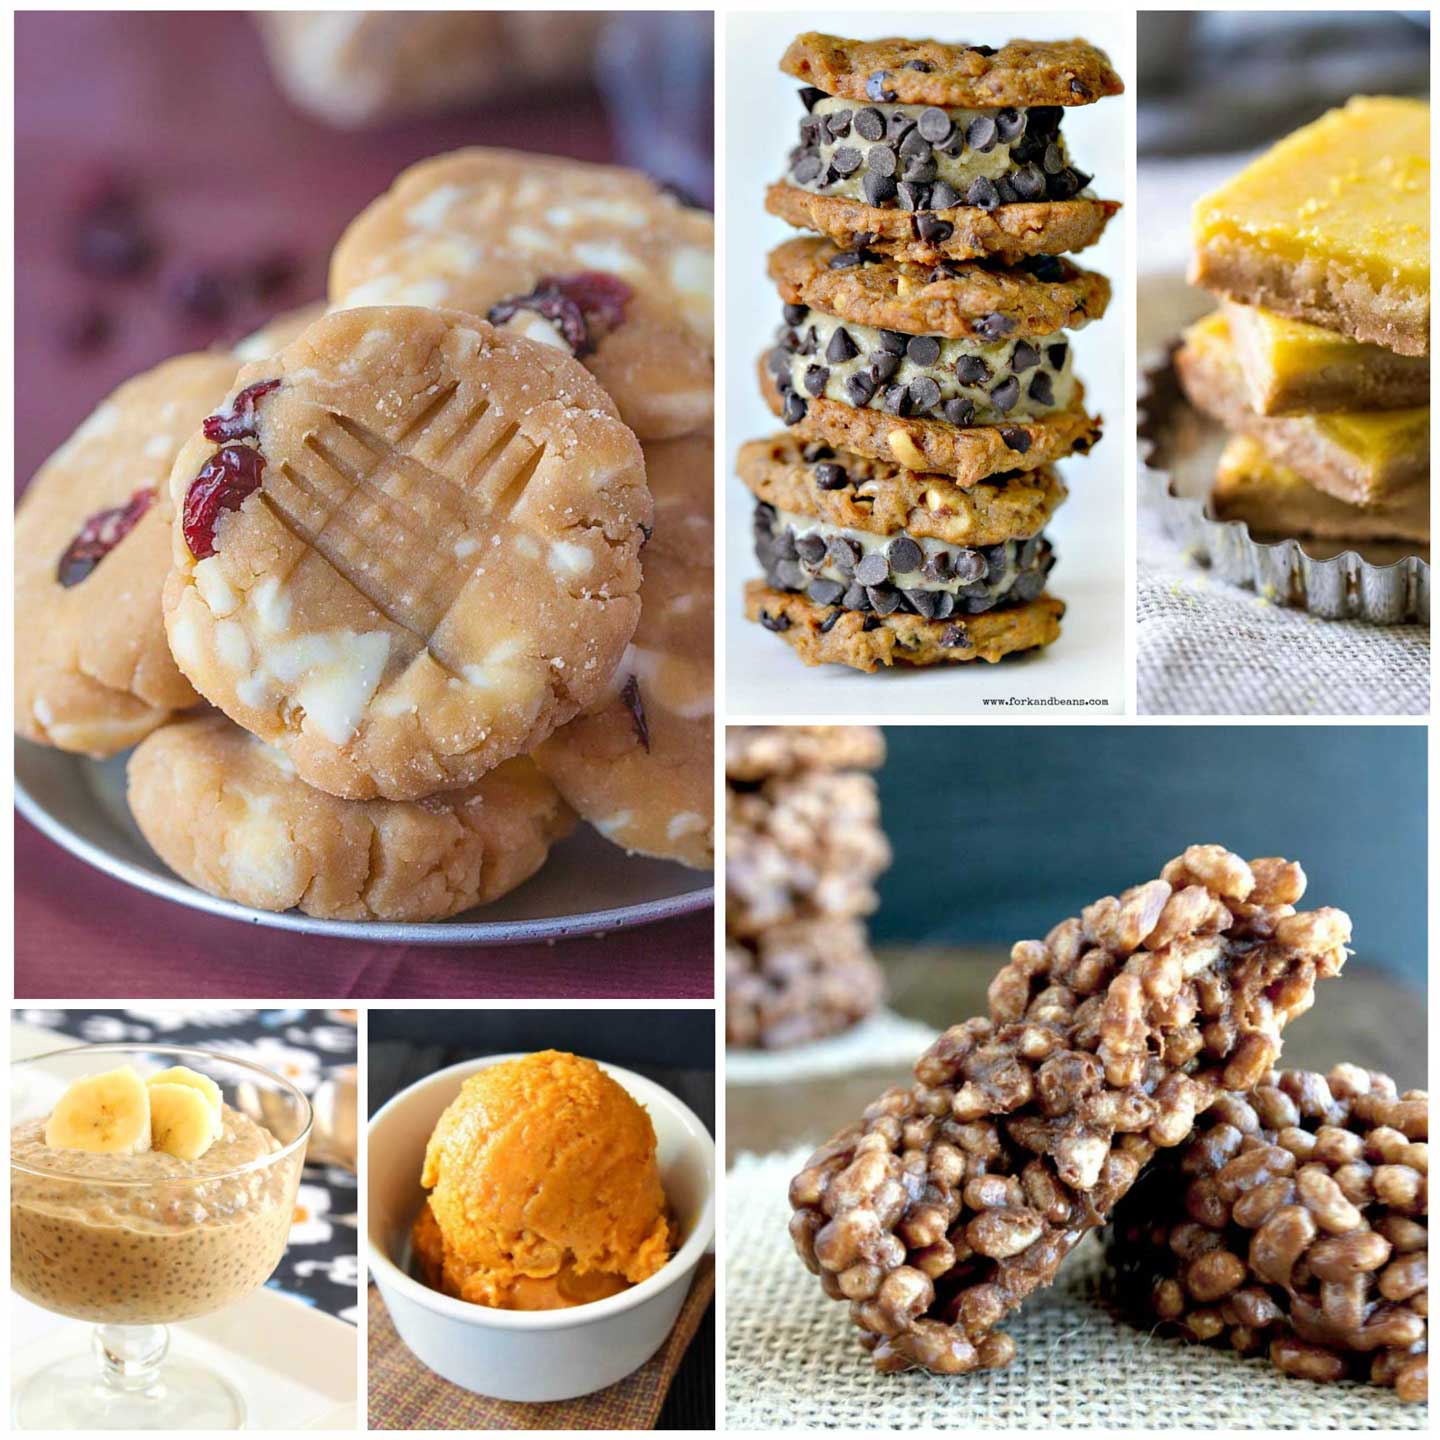 These super-popular dessert recipes are easy, healthy … and already superstars! Some of the most popular healthy recipes food bloggers have ever posted - and now we’re thrilled to share them with you! They totally prove that healthy desserts can still be deliciously decadent and oh-so satisfying. Guilt-free and full of nutritious ingredients, these skinny dessert recipes are the answer to your cravings! Healthy dessert recipes you can truly feel good about serving! | www.TwoHealthyKitchens.com